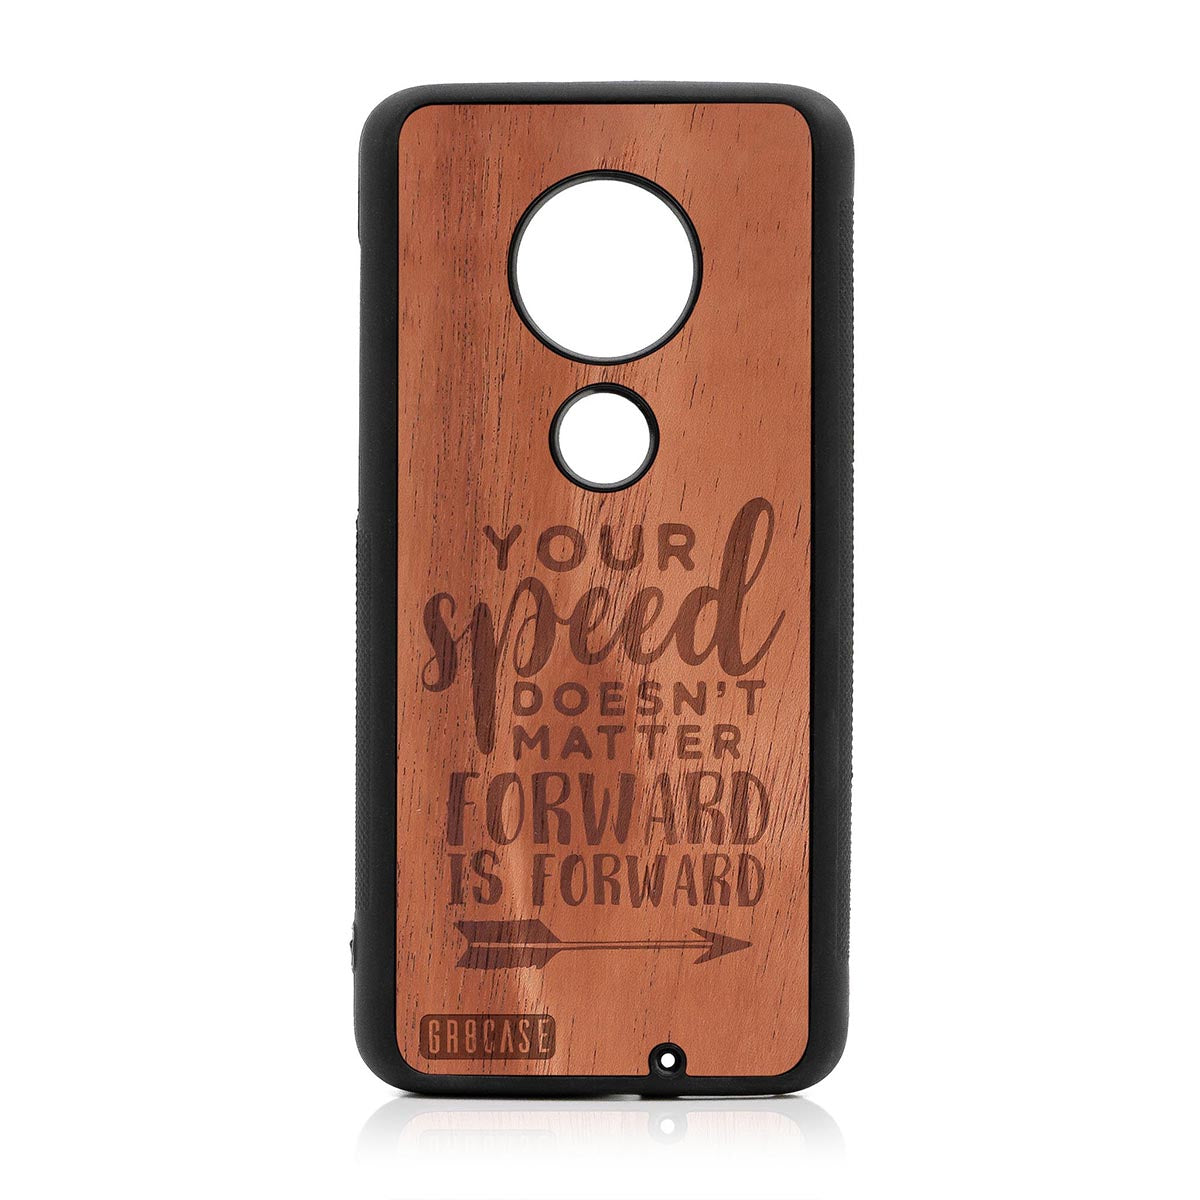 Your Speed Doesn't Matter Forward Is Forward Design Wood Case Moto G7 Plus